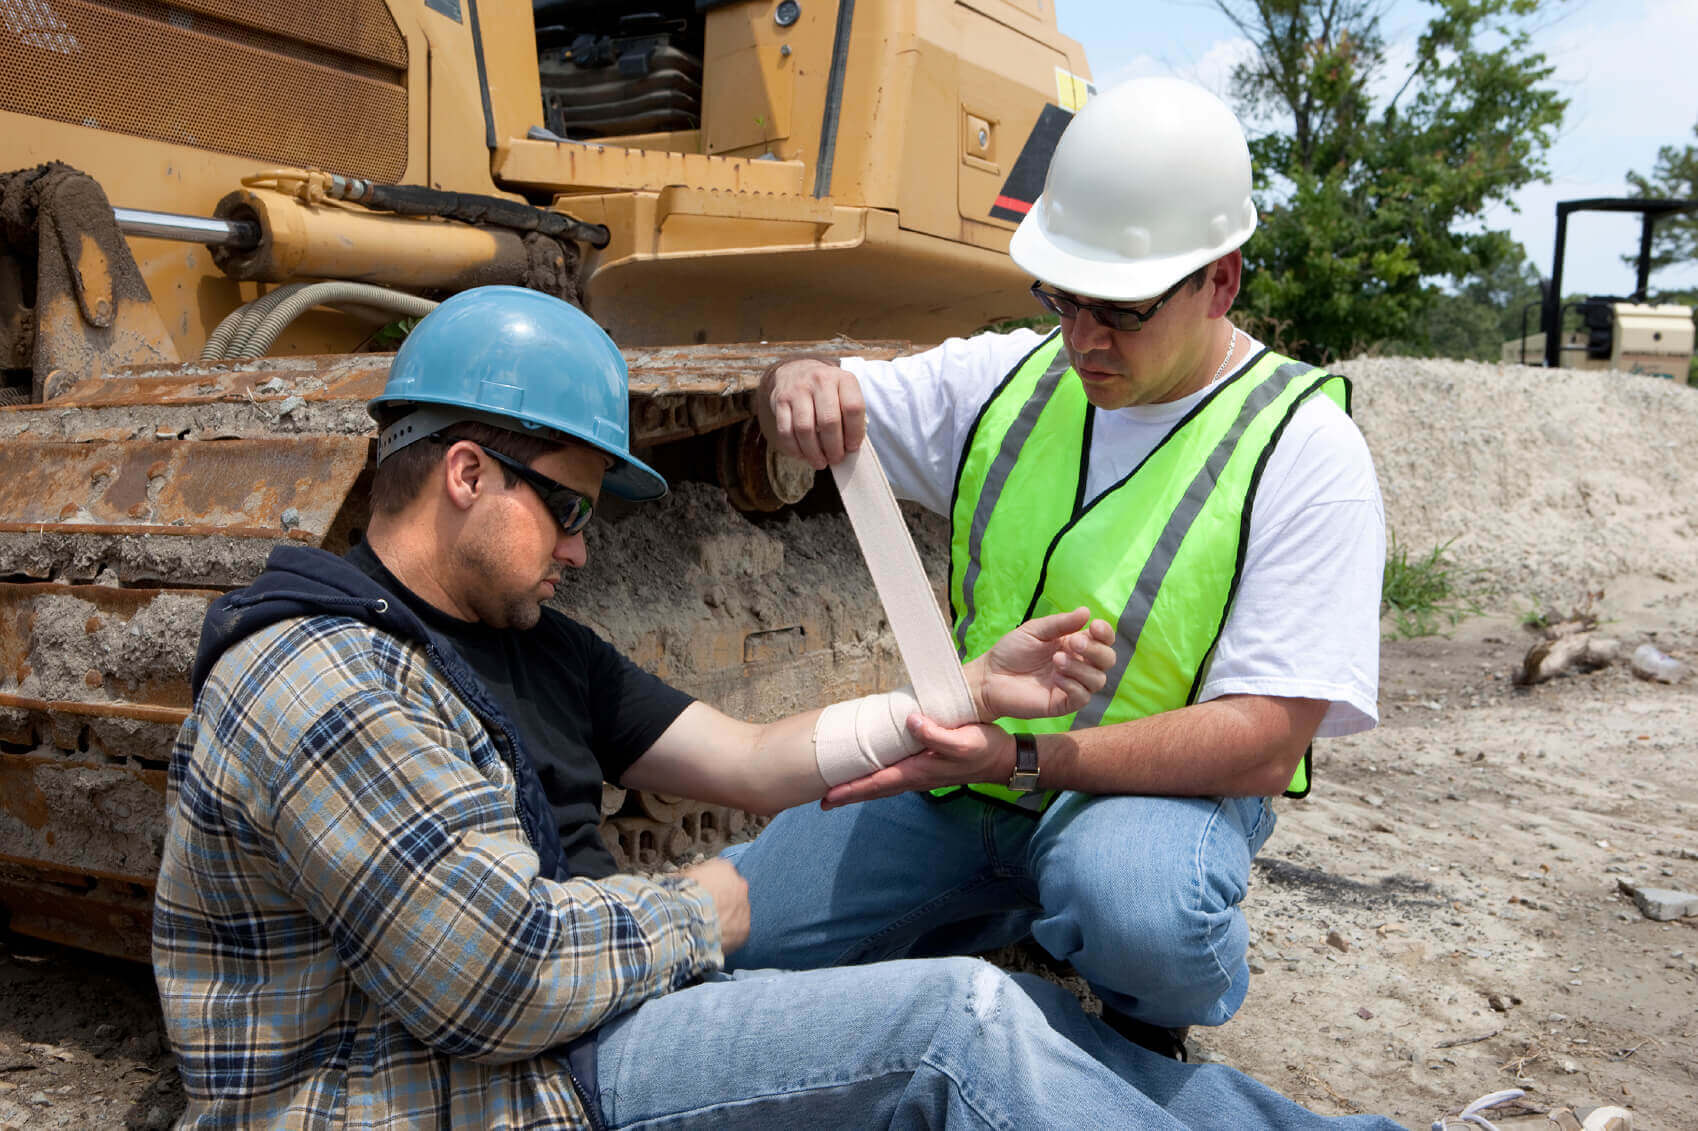 Construction worker providing first aid bandaging to injured worker.